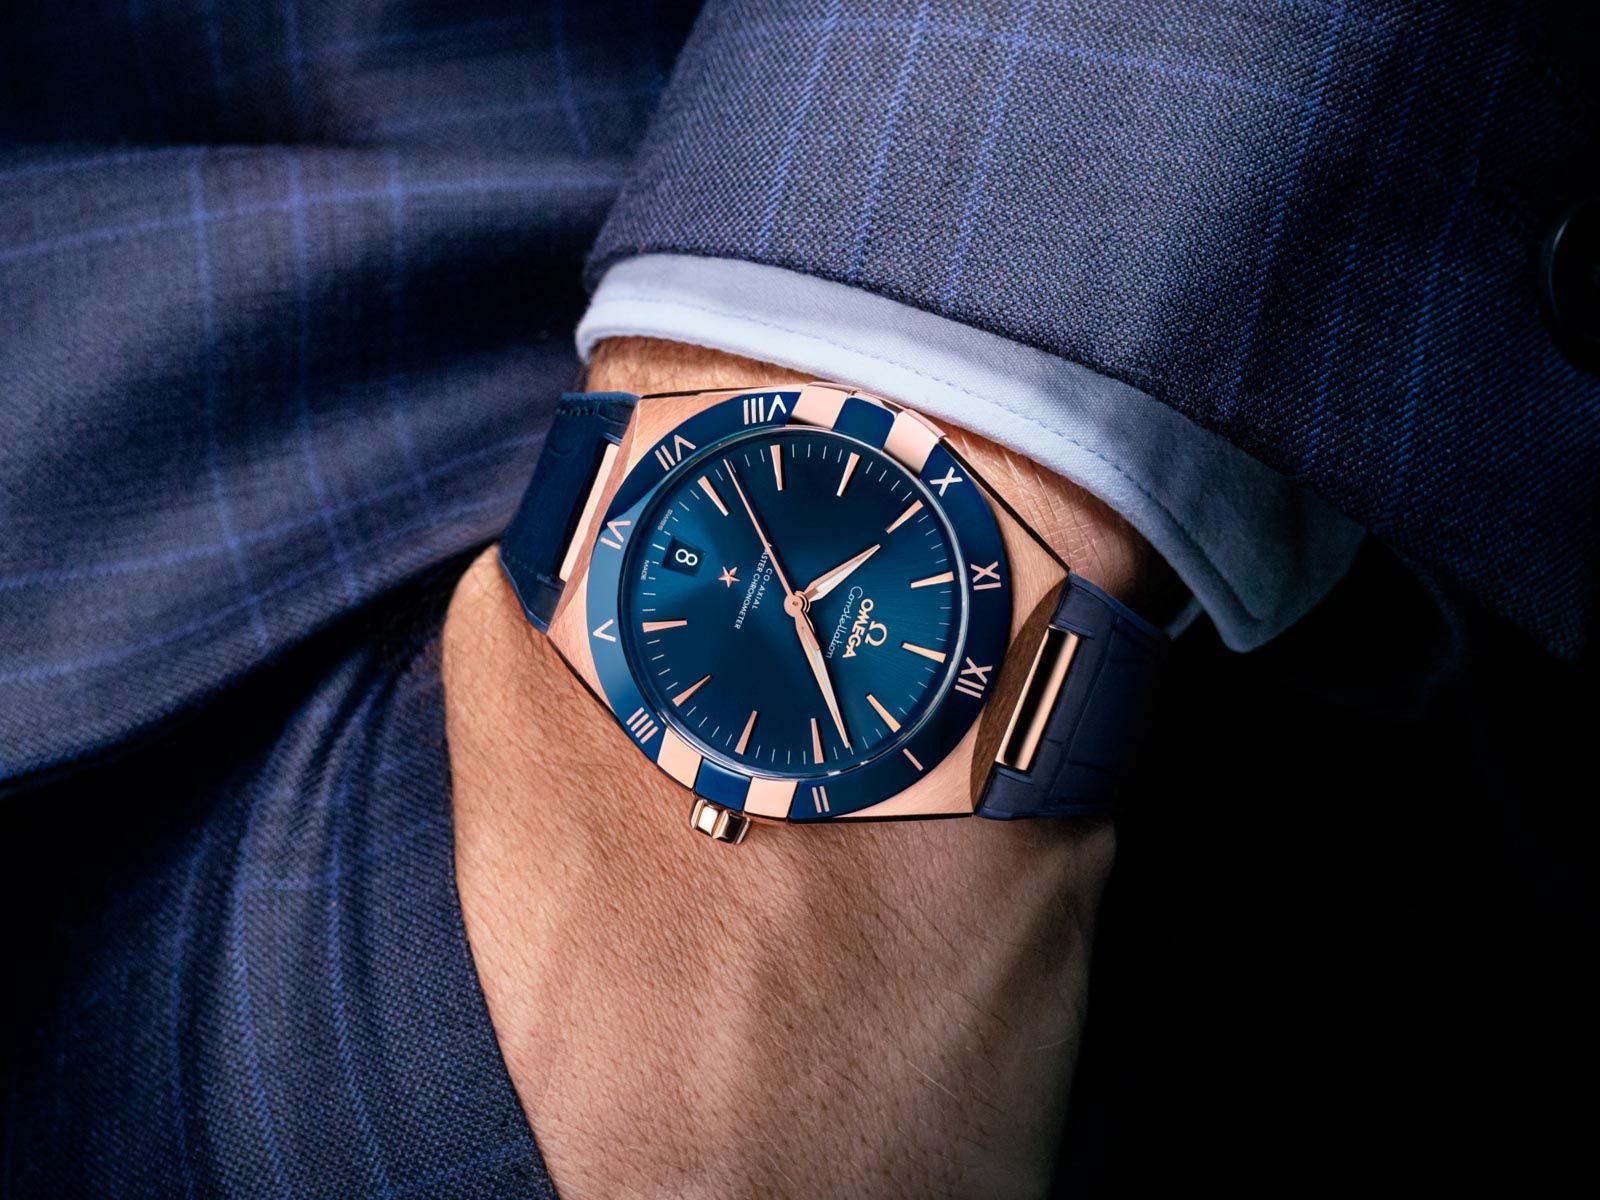 The male replica watch has blue dial.